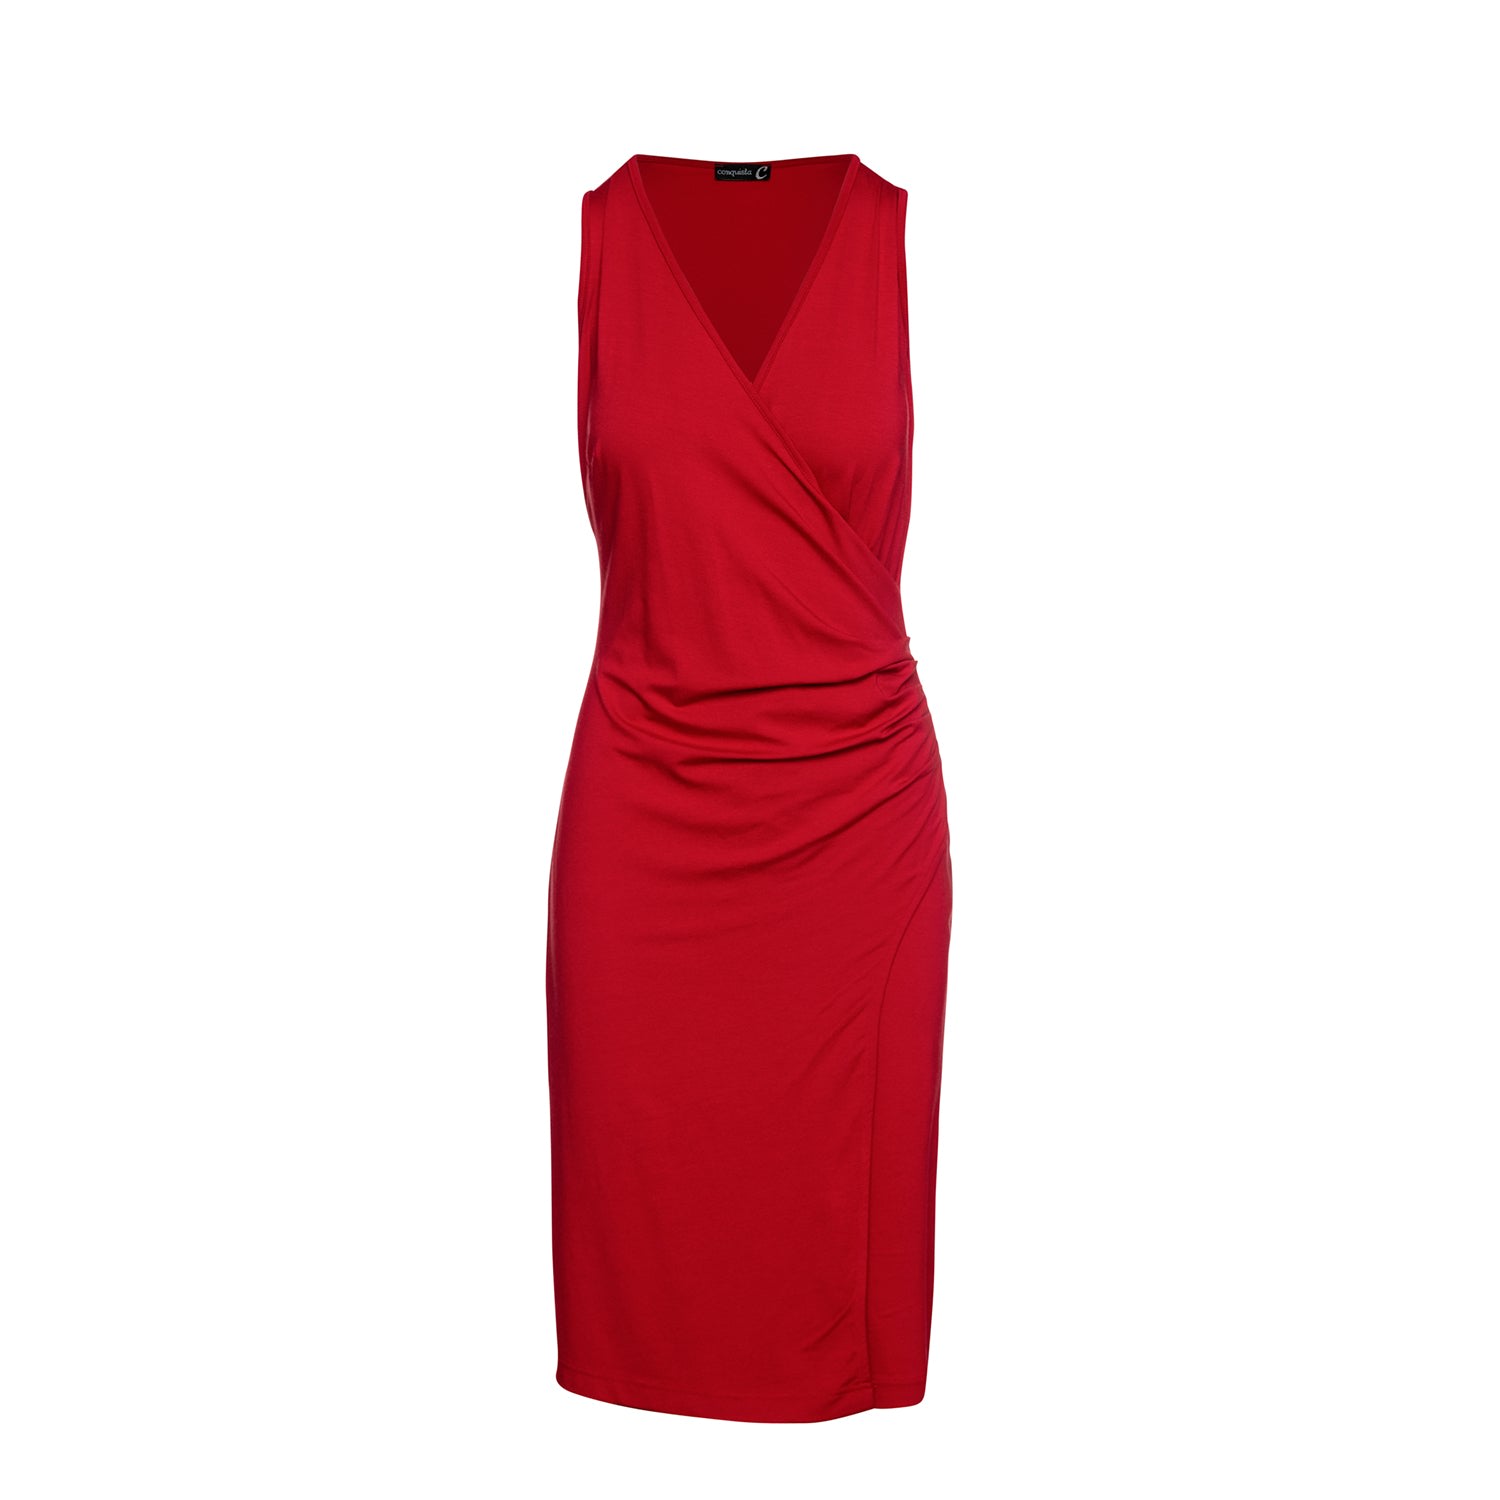 Women’s Wrap Style Sleeveless Dress In Red Extra Large Conquista